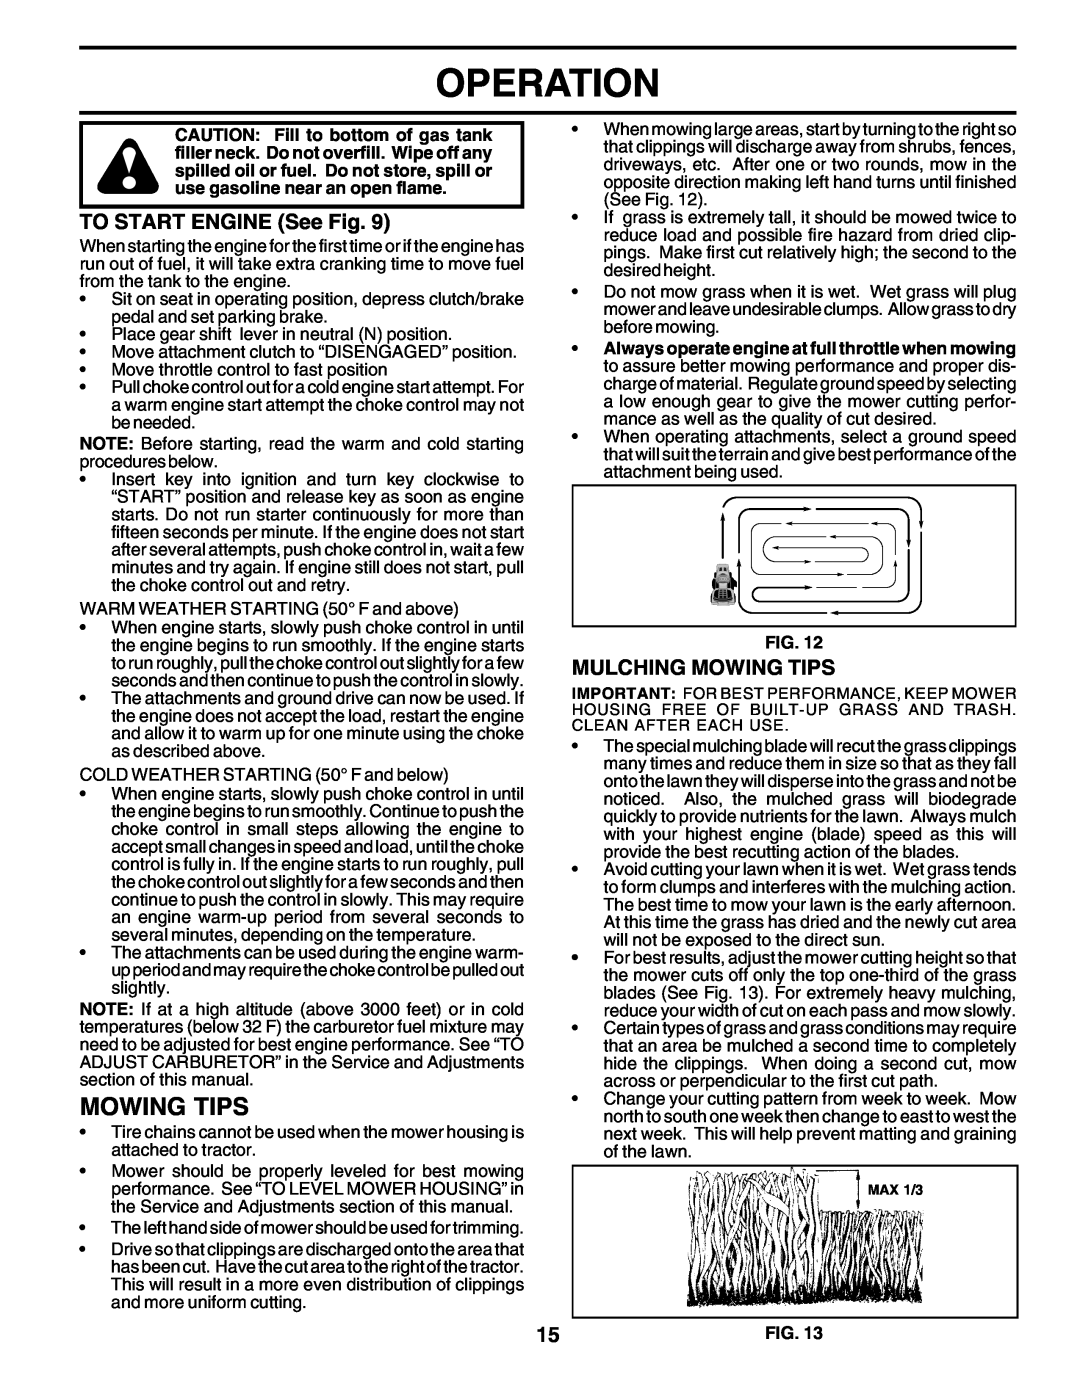 Poulan 177271 owner manual Operation, TO START ENGINE See Fig, Mulching Mowing Tips 